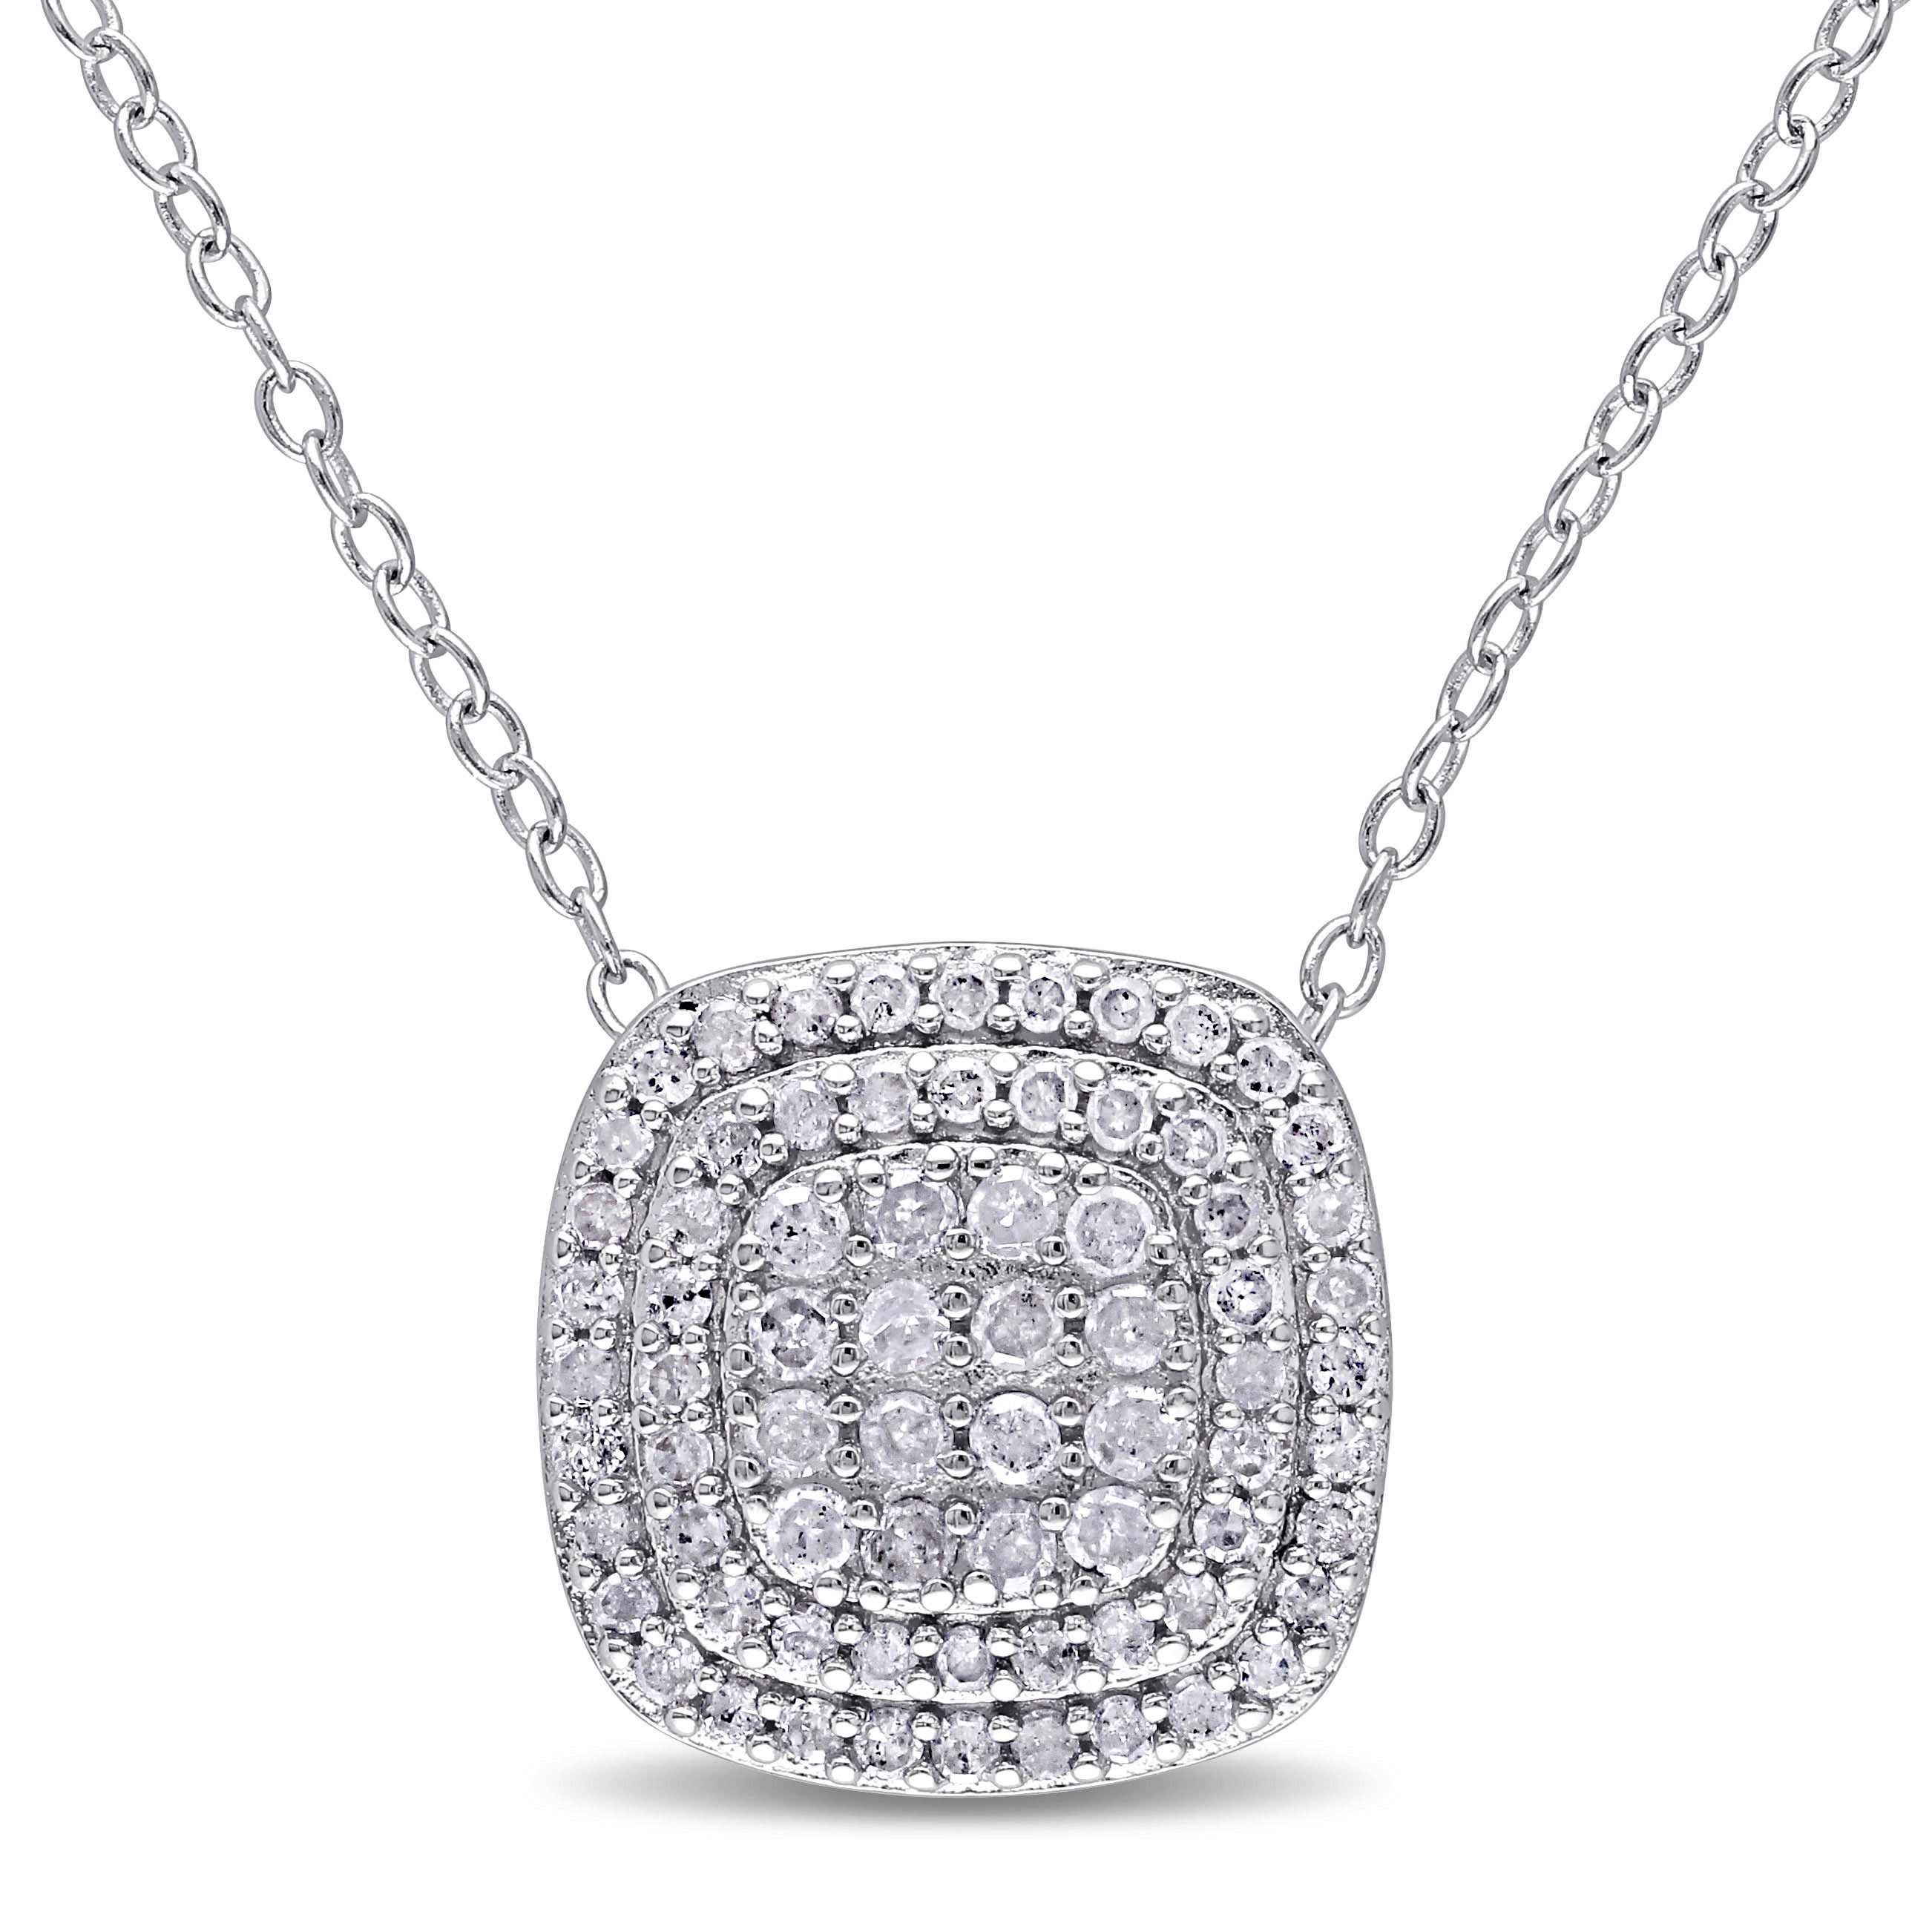 1/2 CT TW Diamond Layered Halo Pendant with Chain in Sterling Silver - 18 in.